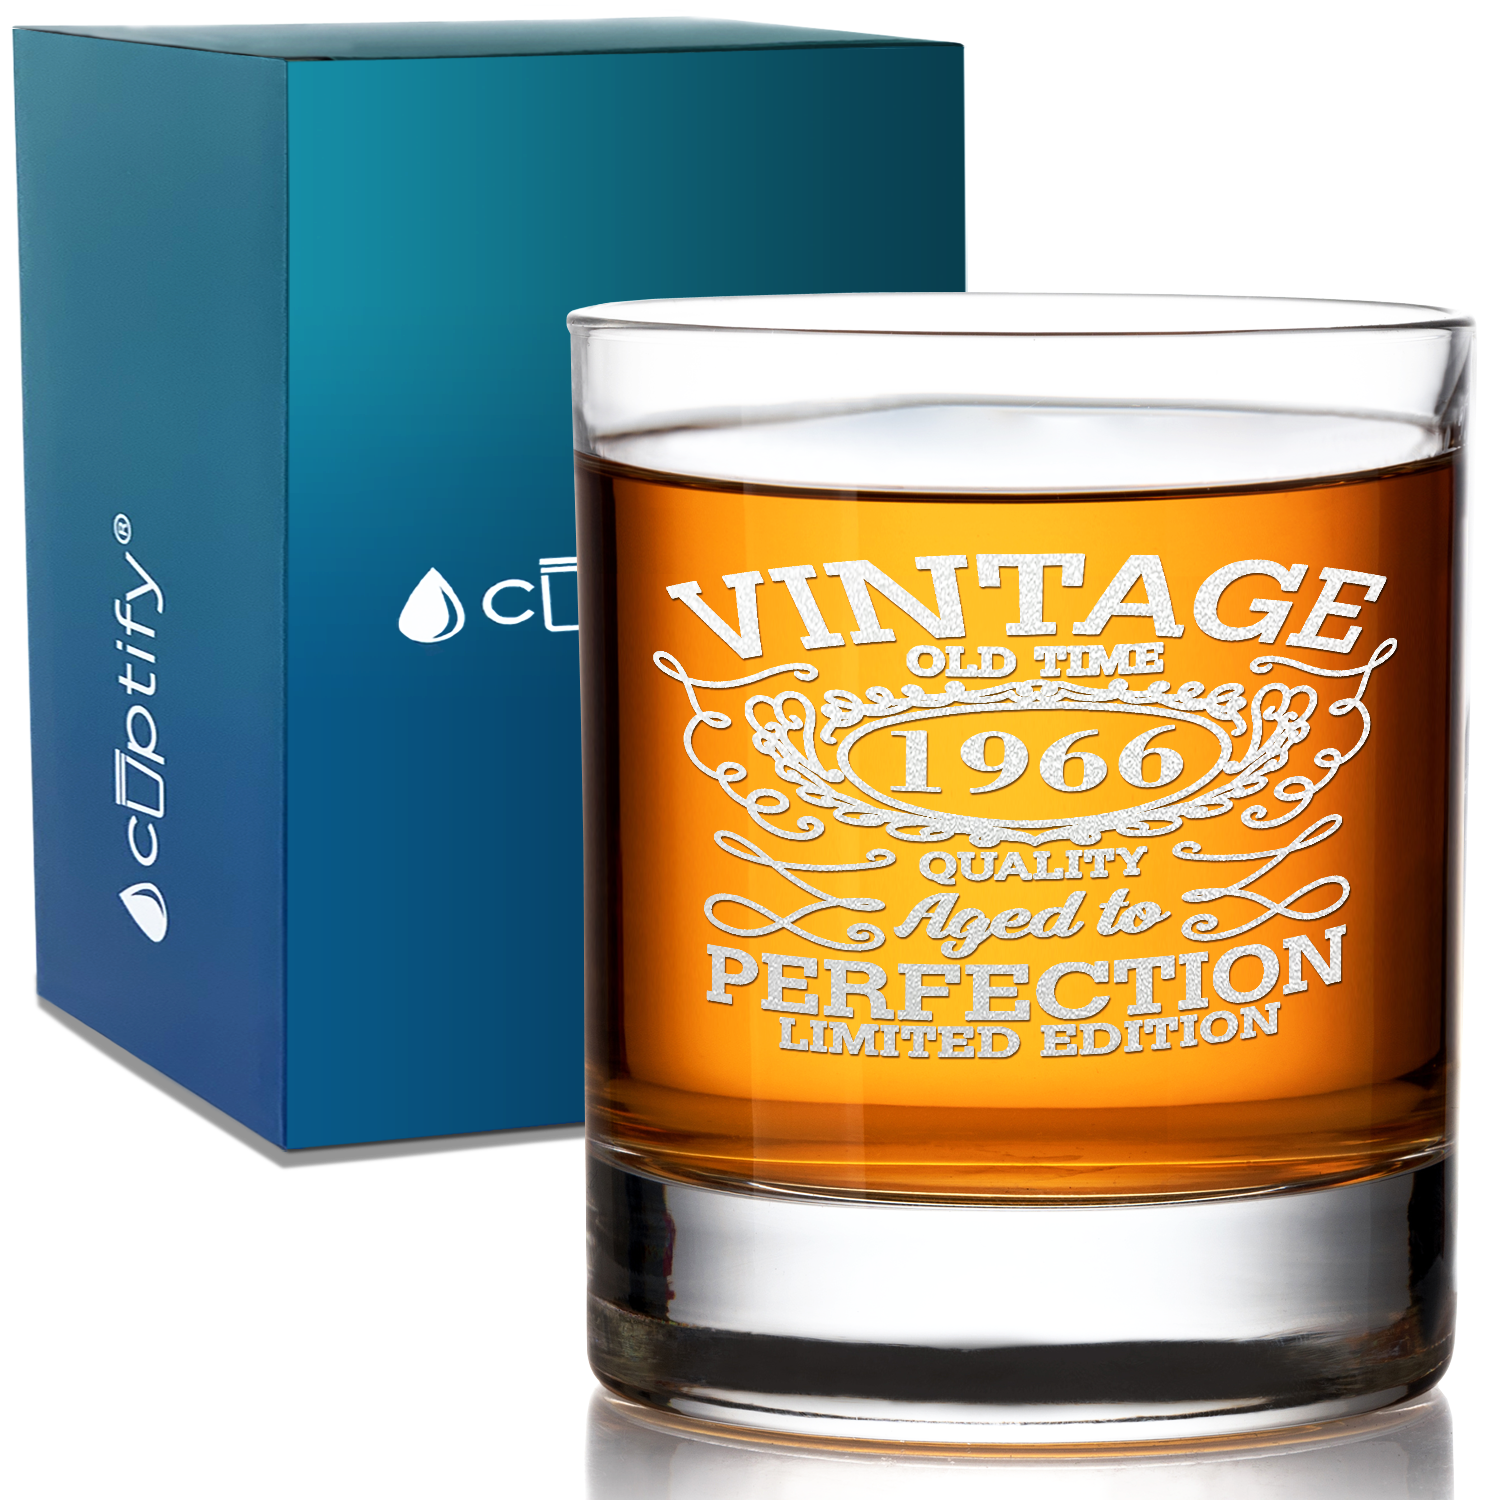 55th Birthday Vintage 55 Years Old Time 1966 Quality Laser Engraved 10.25oz Old Fashion Glass